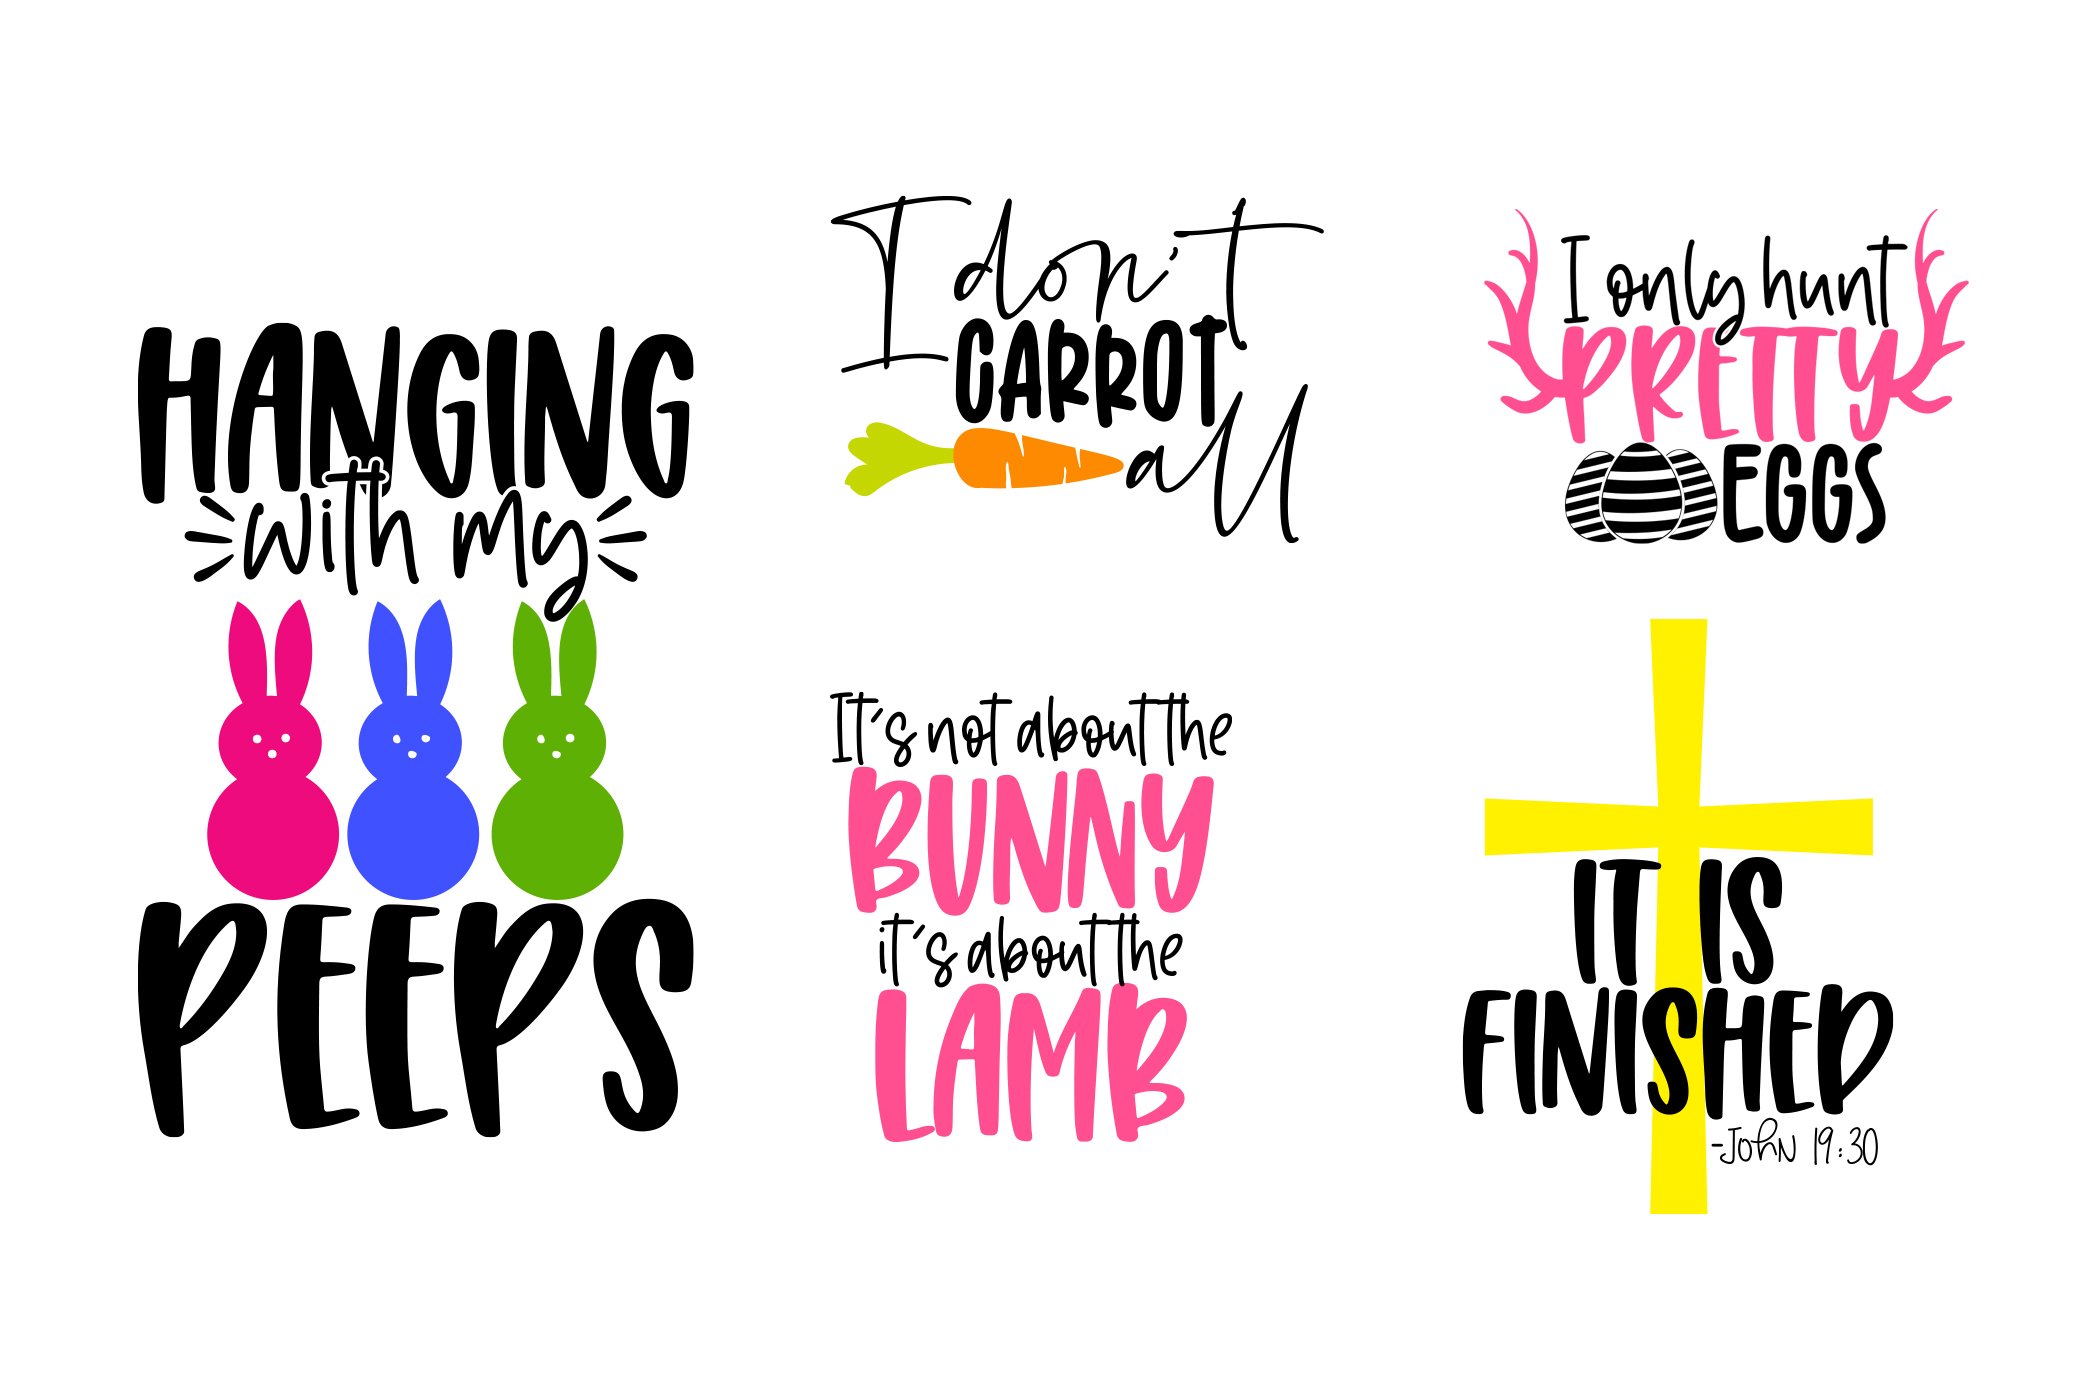 Set of four easter sayings on a white background.